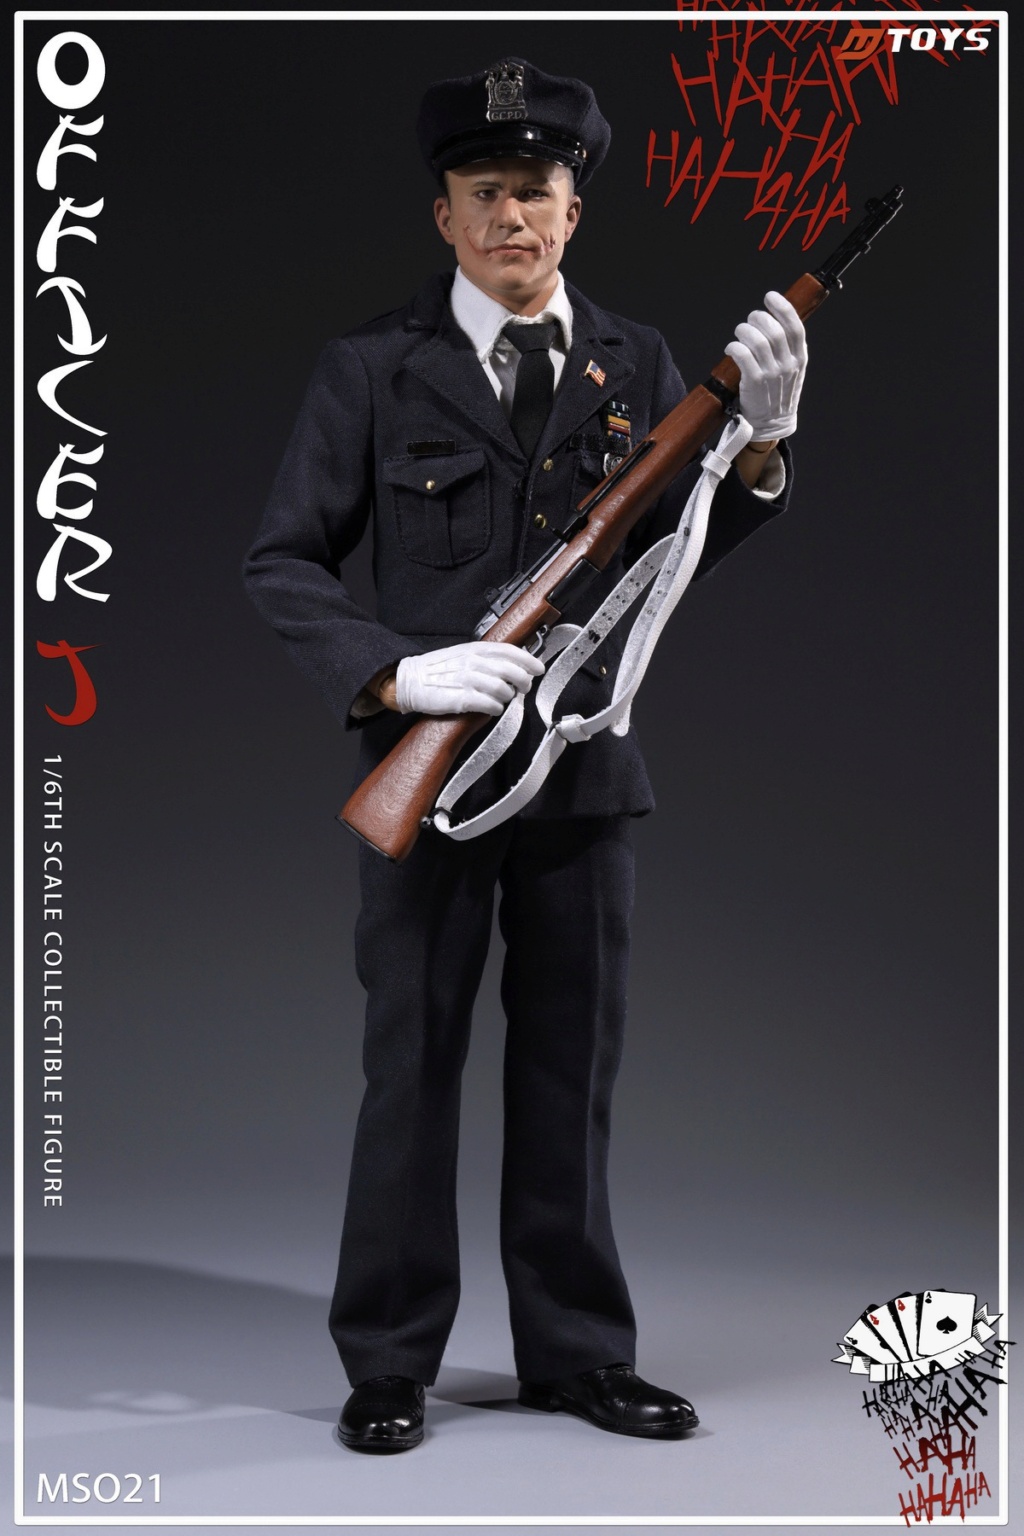 movie-based - NEW PRODUCT: Mtoys: MS021 1/6 Scale Police Clown B4742e10